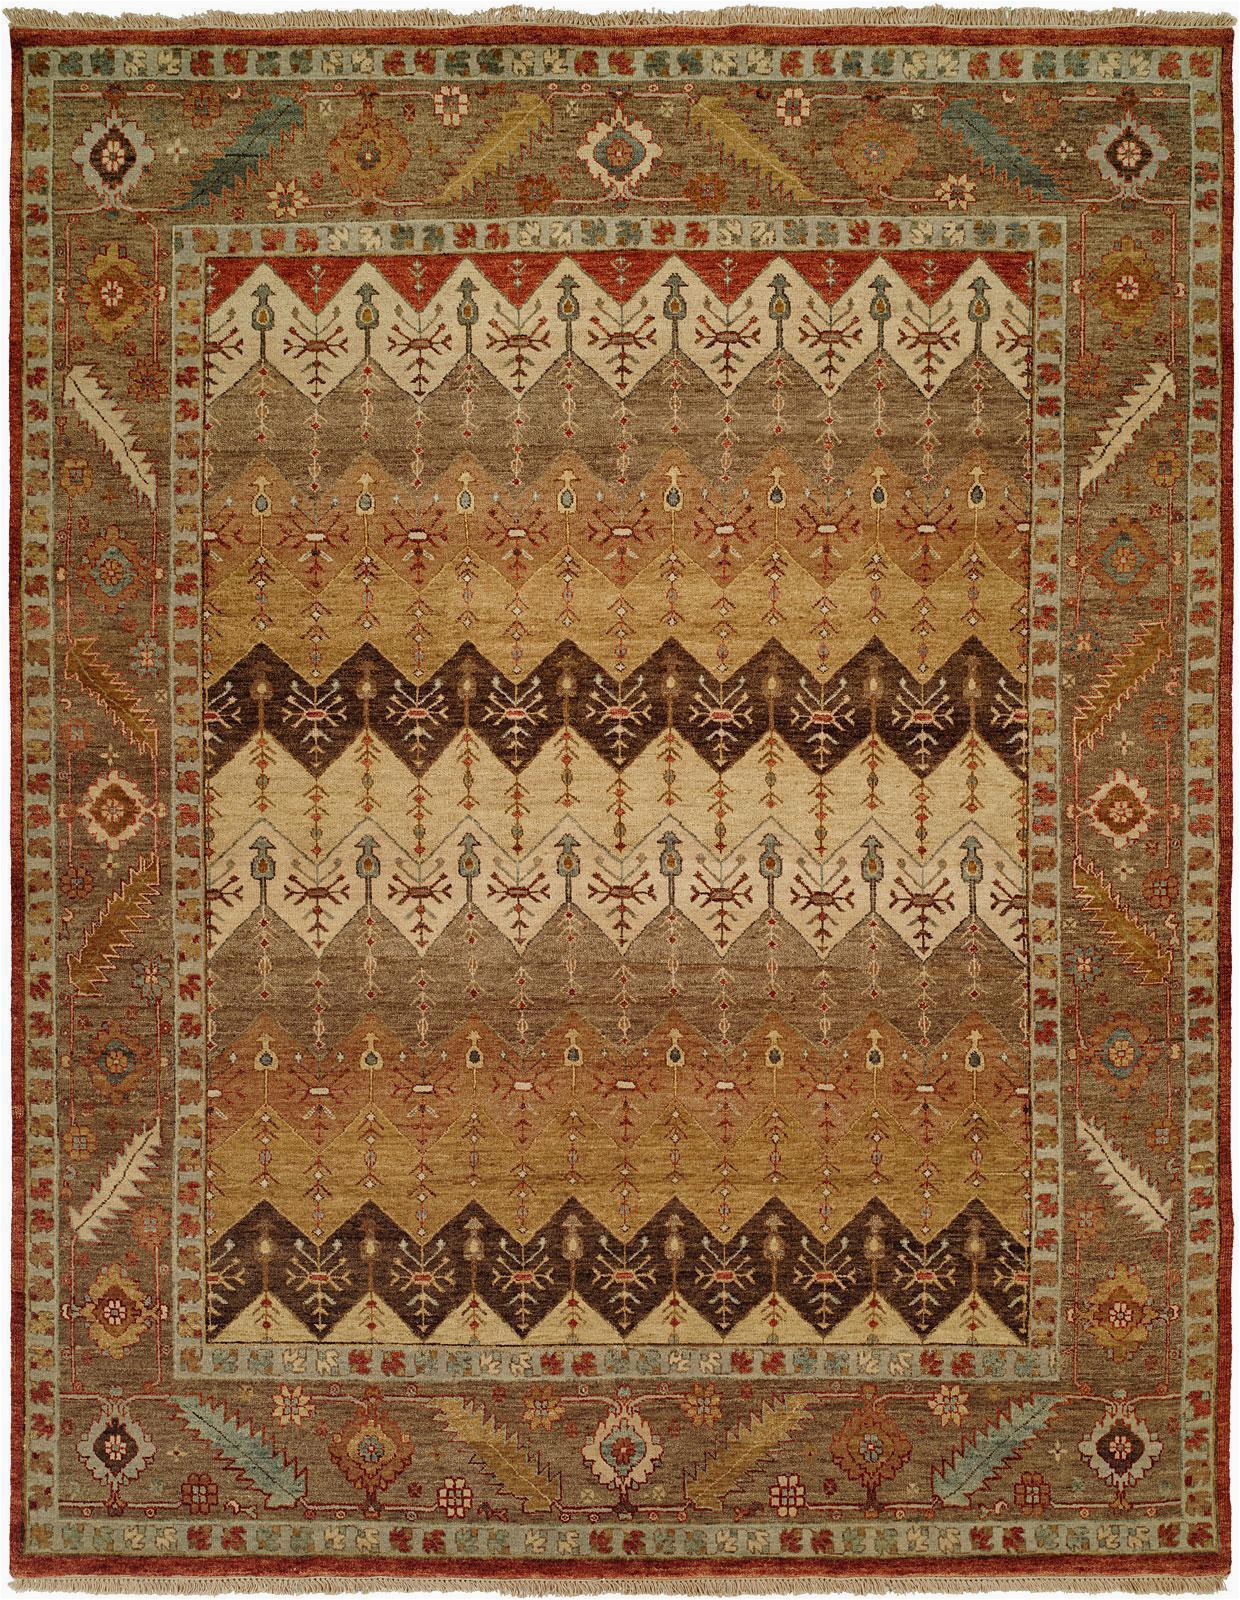 Brown and Rust Colored area Rugs Brown Rust and Tan Multi Colored area Rug